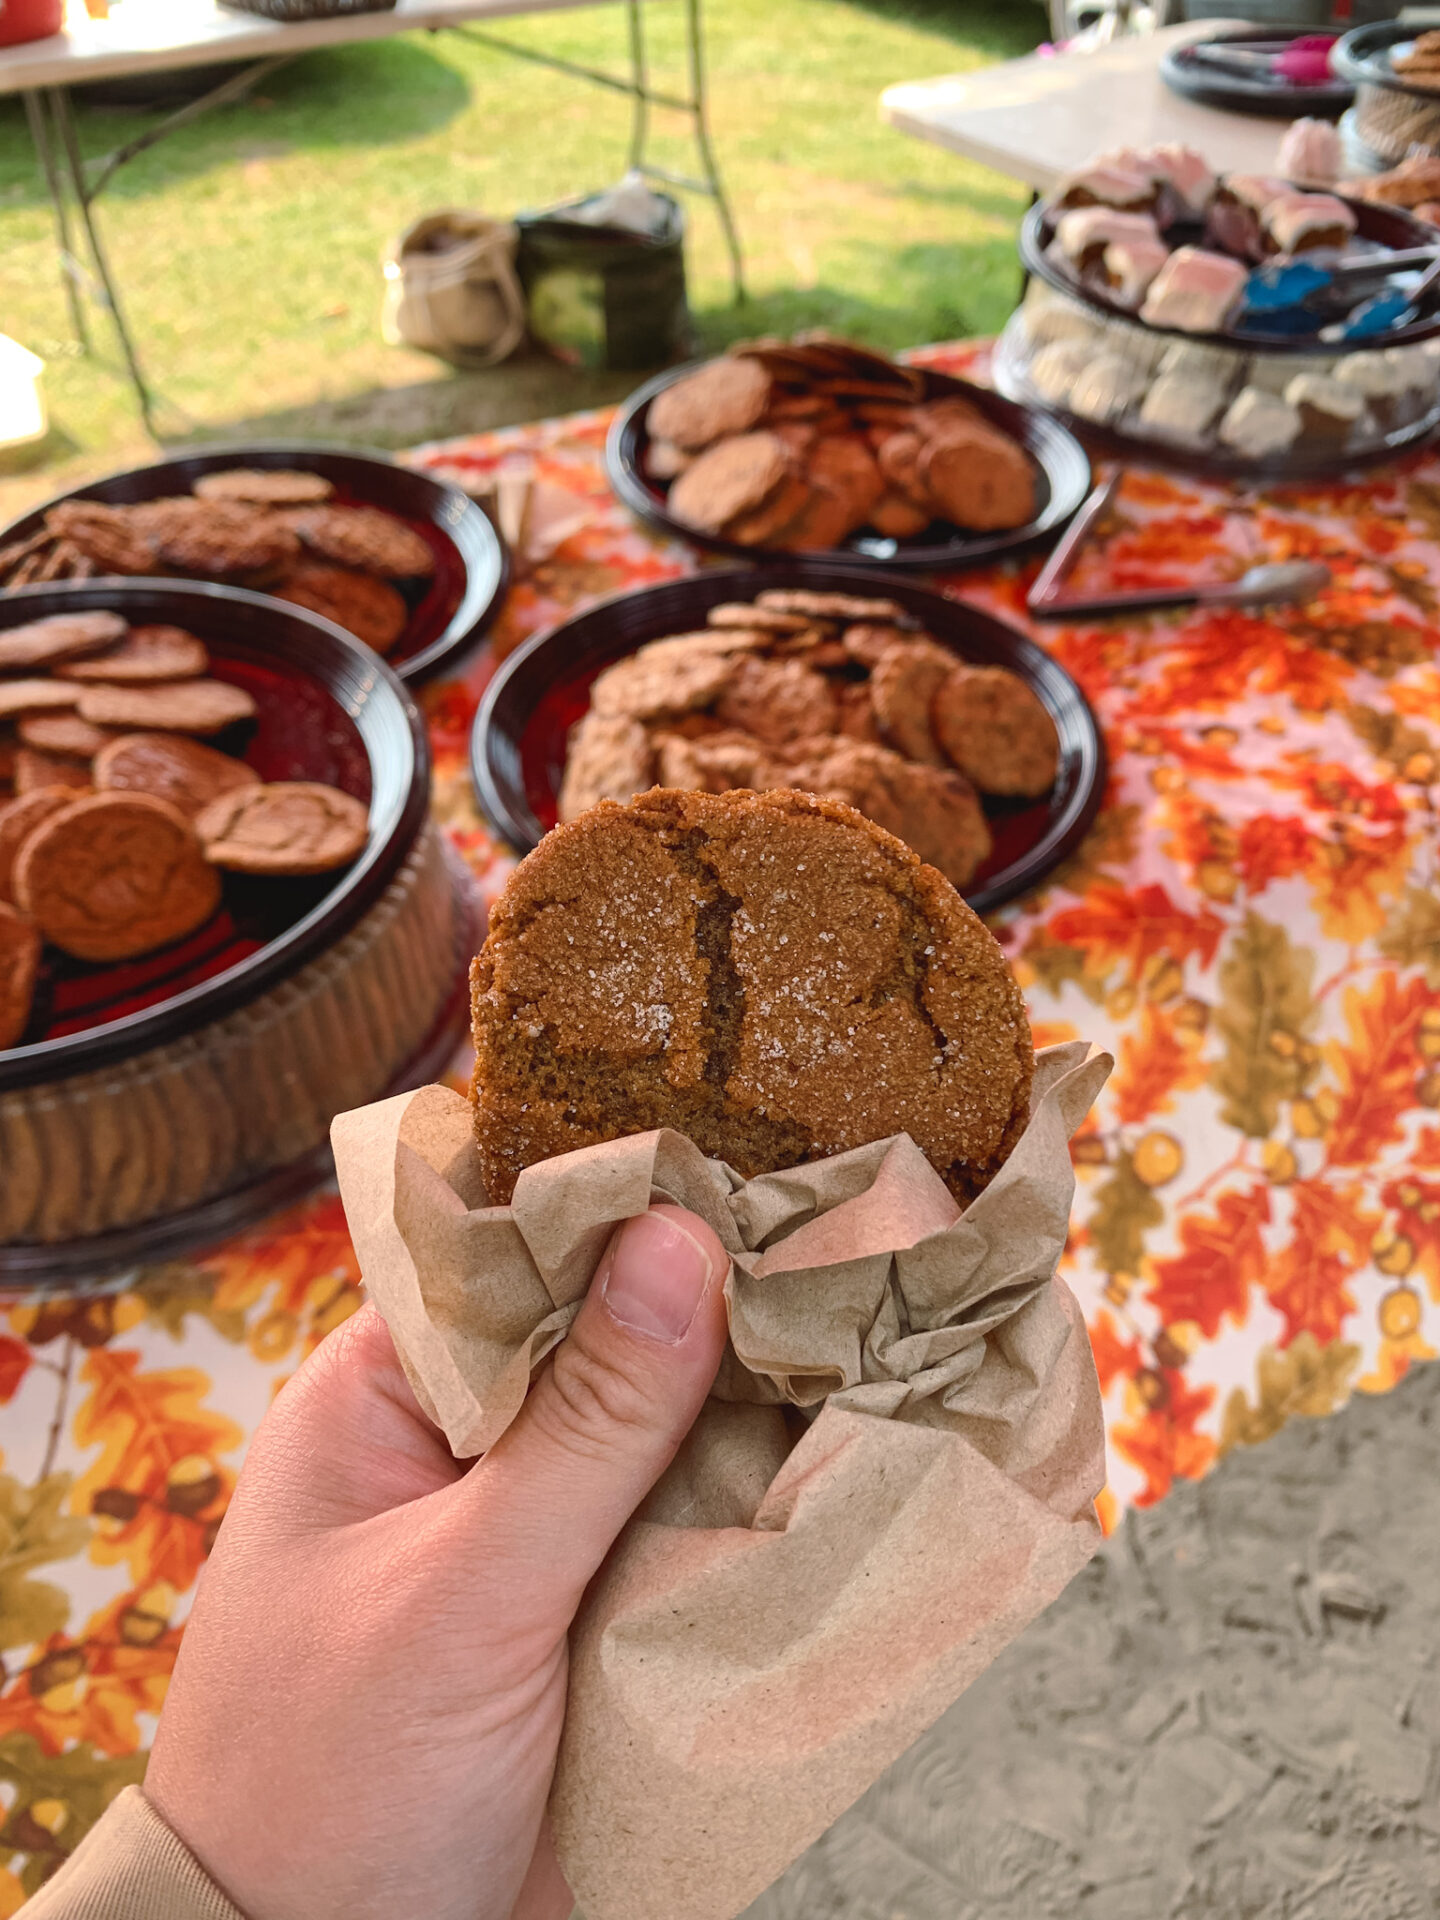 Ginger Cookies from Aurora Farmers' Market in Aurora, Ontario